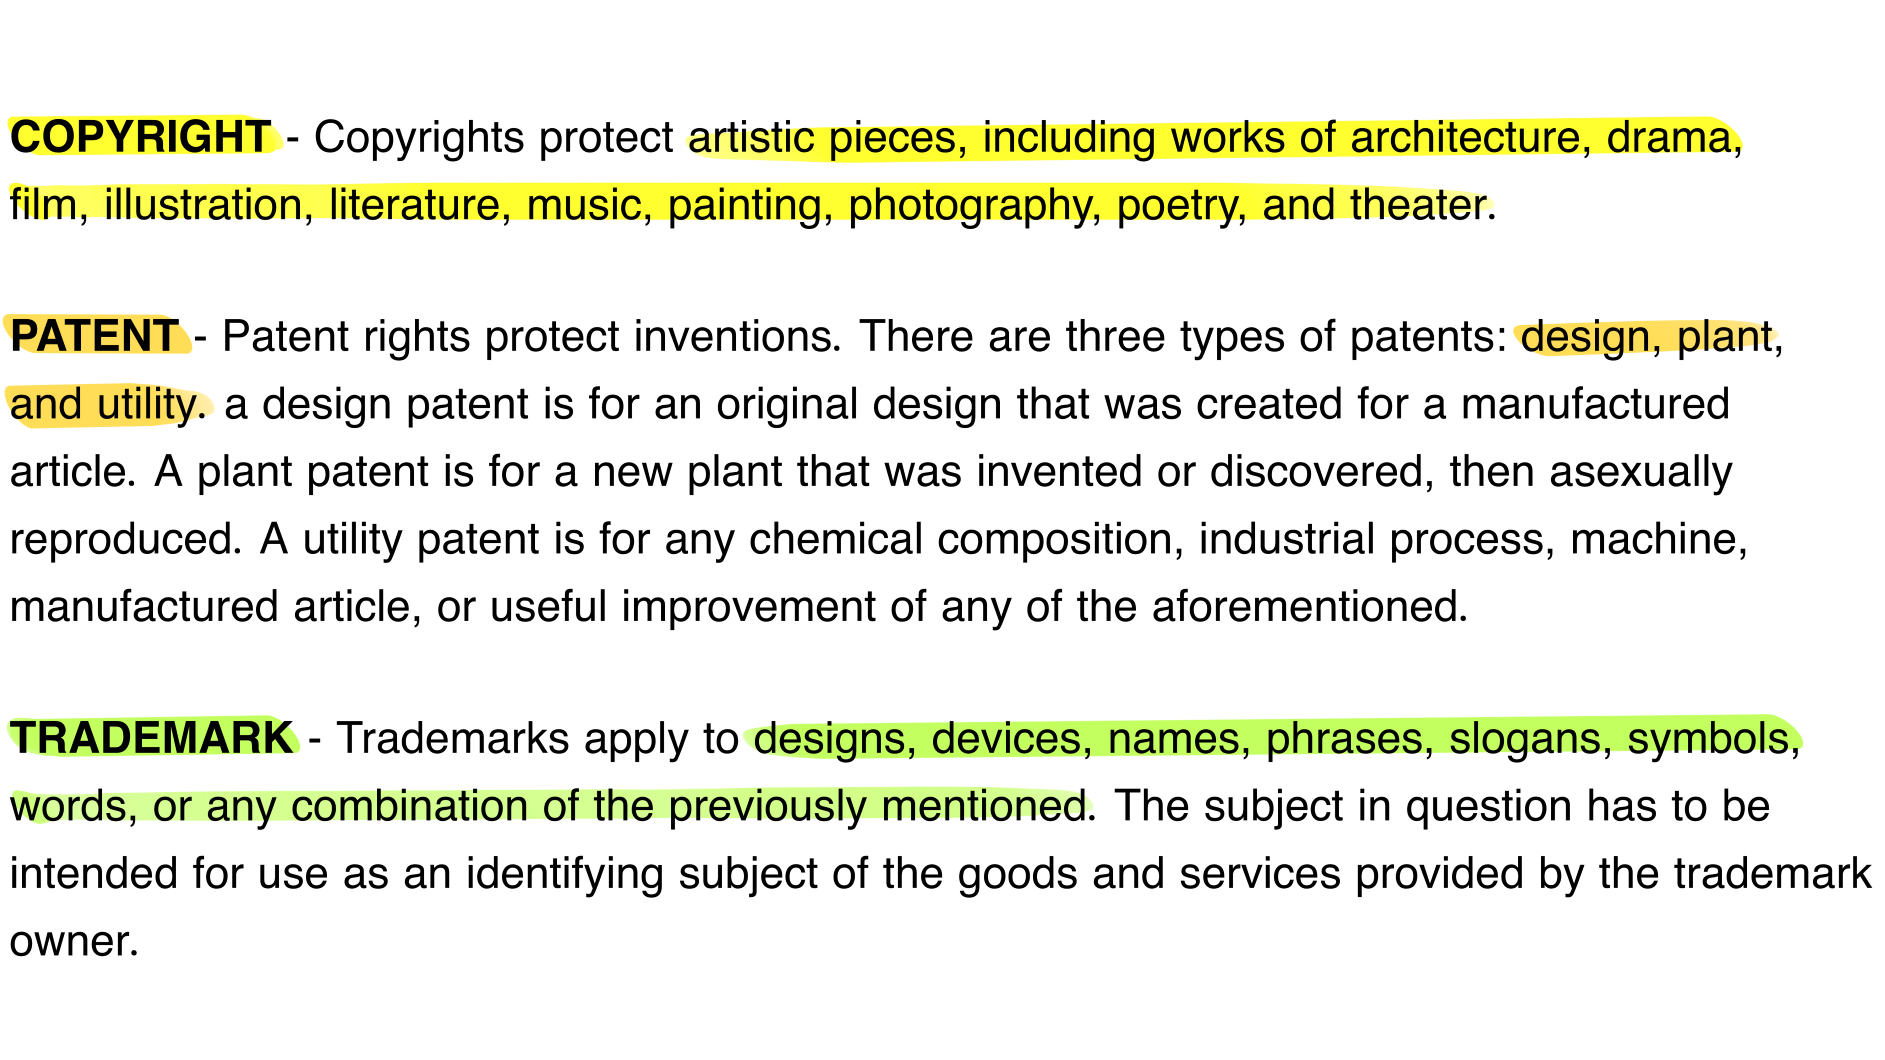 What property do these rights apply to, Copyright, Patent and Trademark 